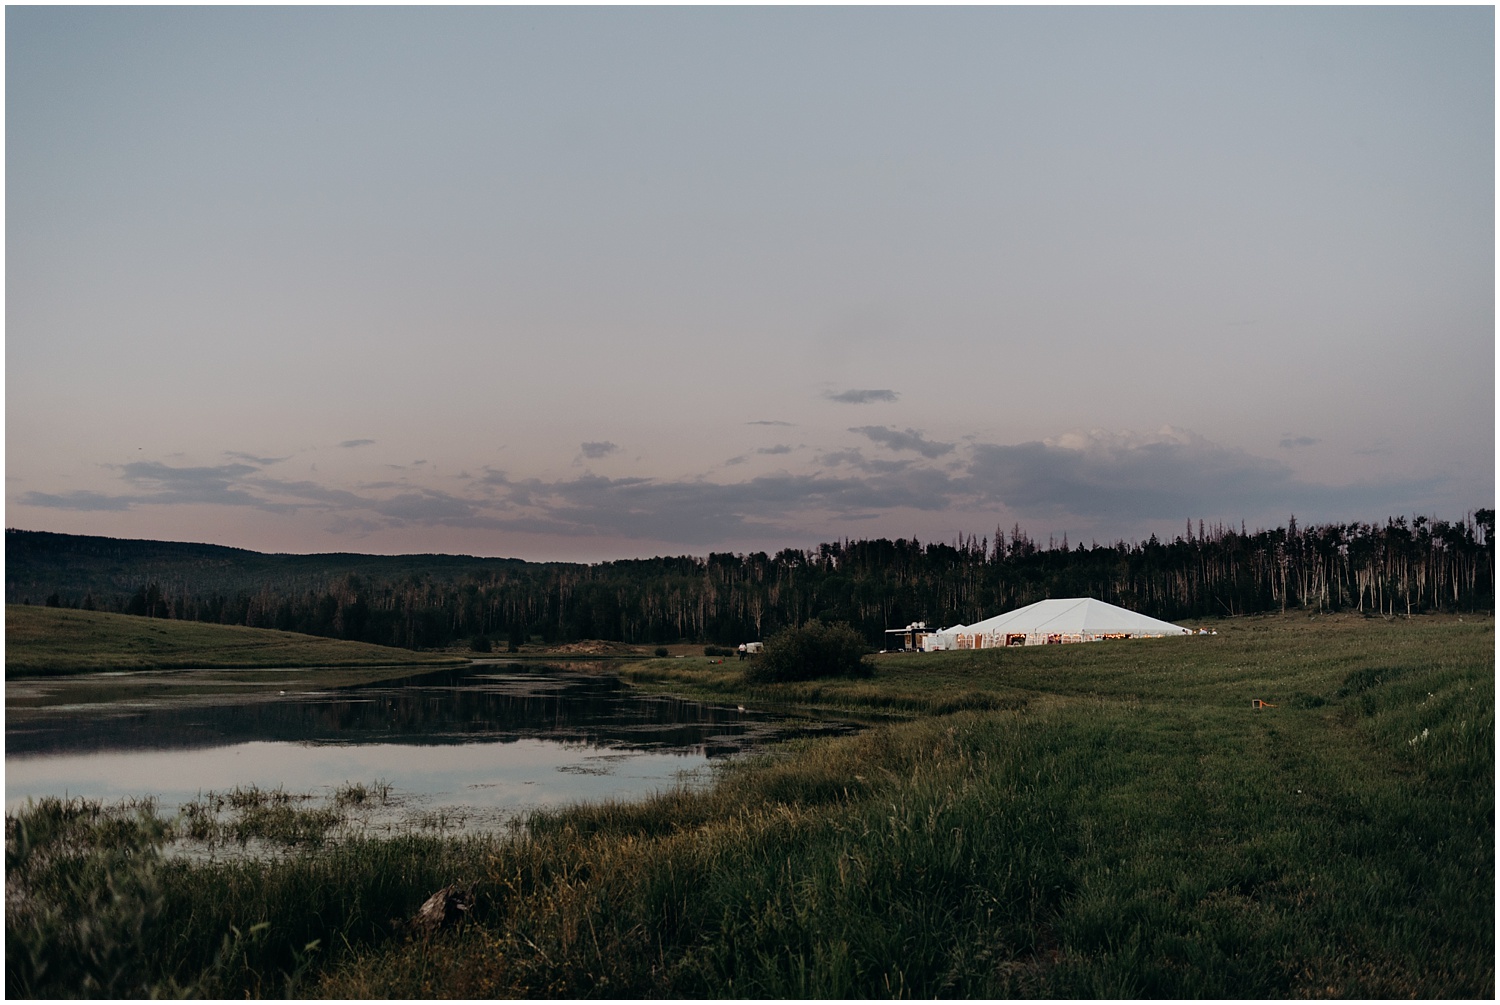 A ceremony and reception documented through photojournalism in Northern, Colorado.